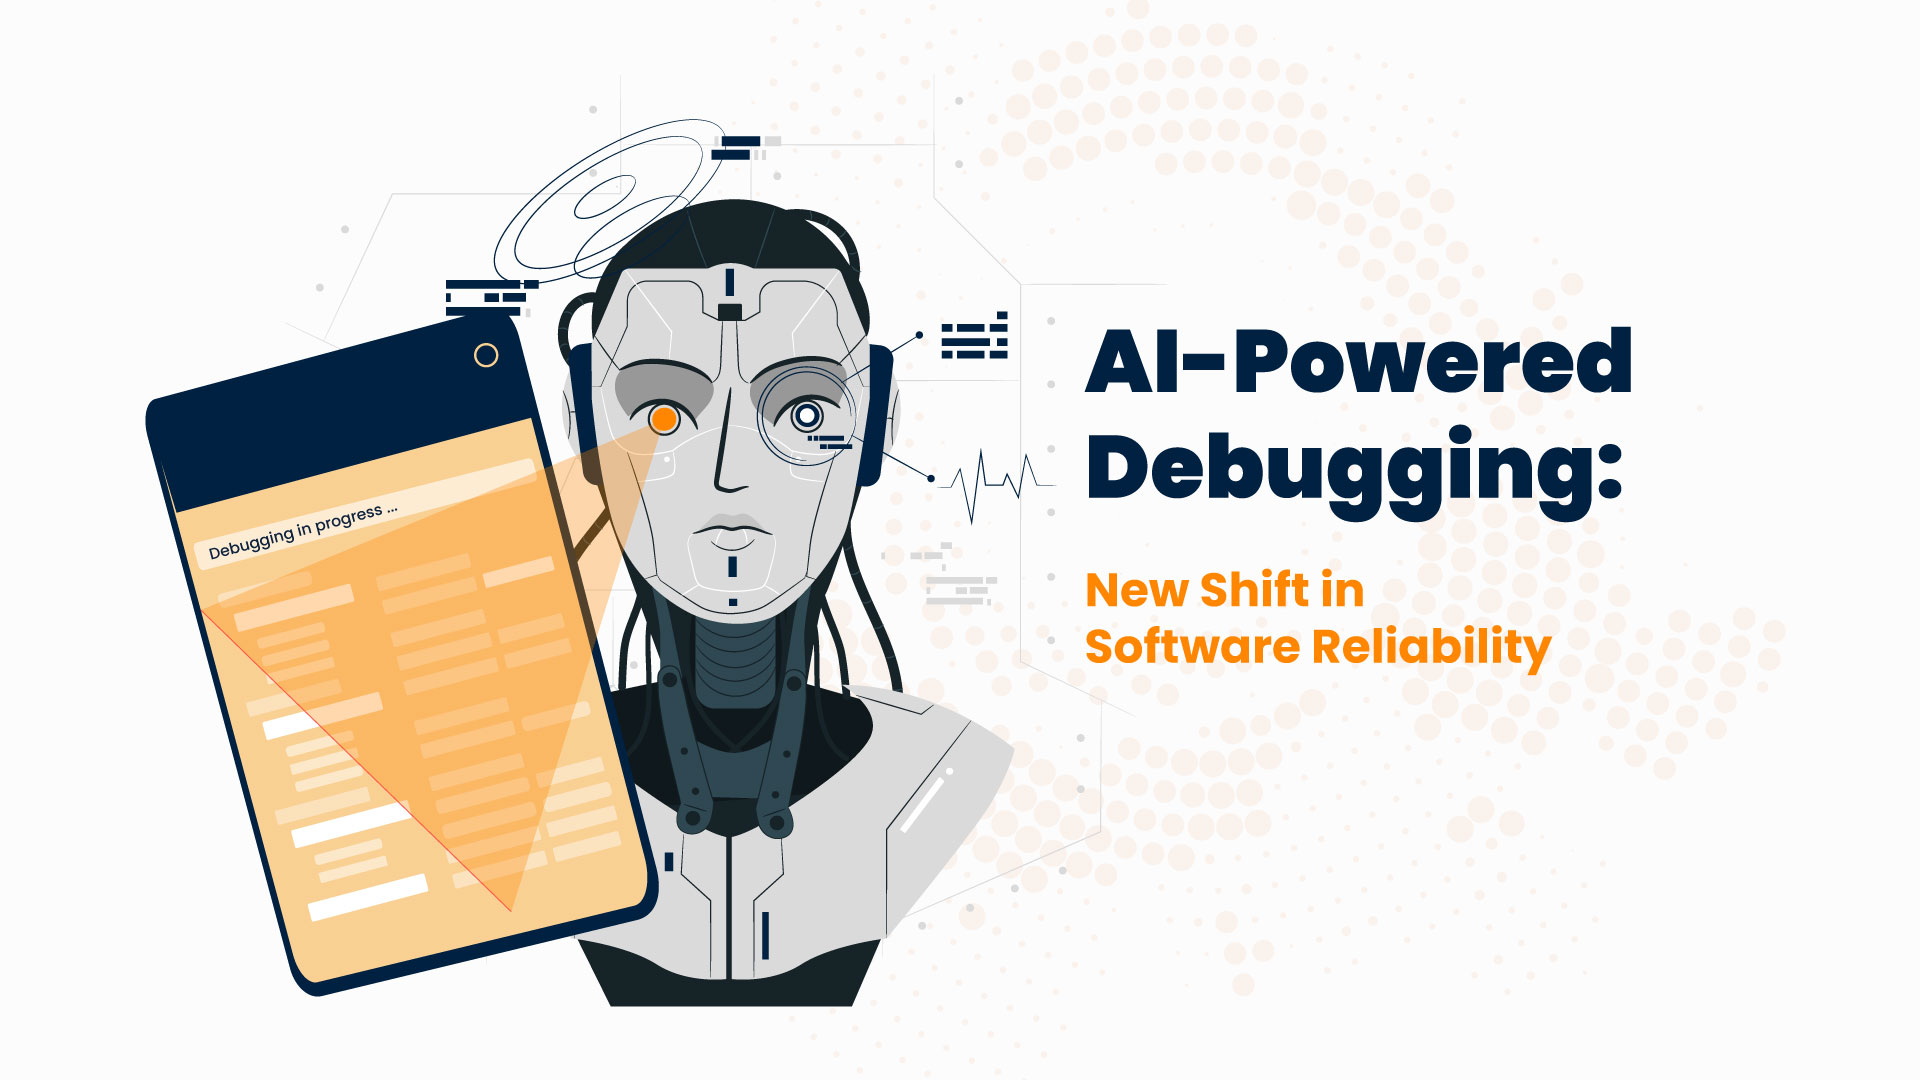 AI-Powered Debugging: New Shift in Software Reliability